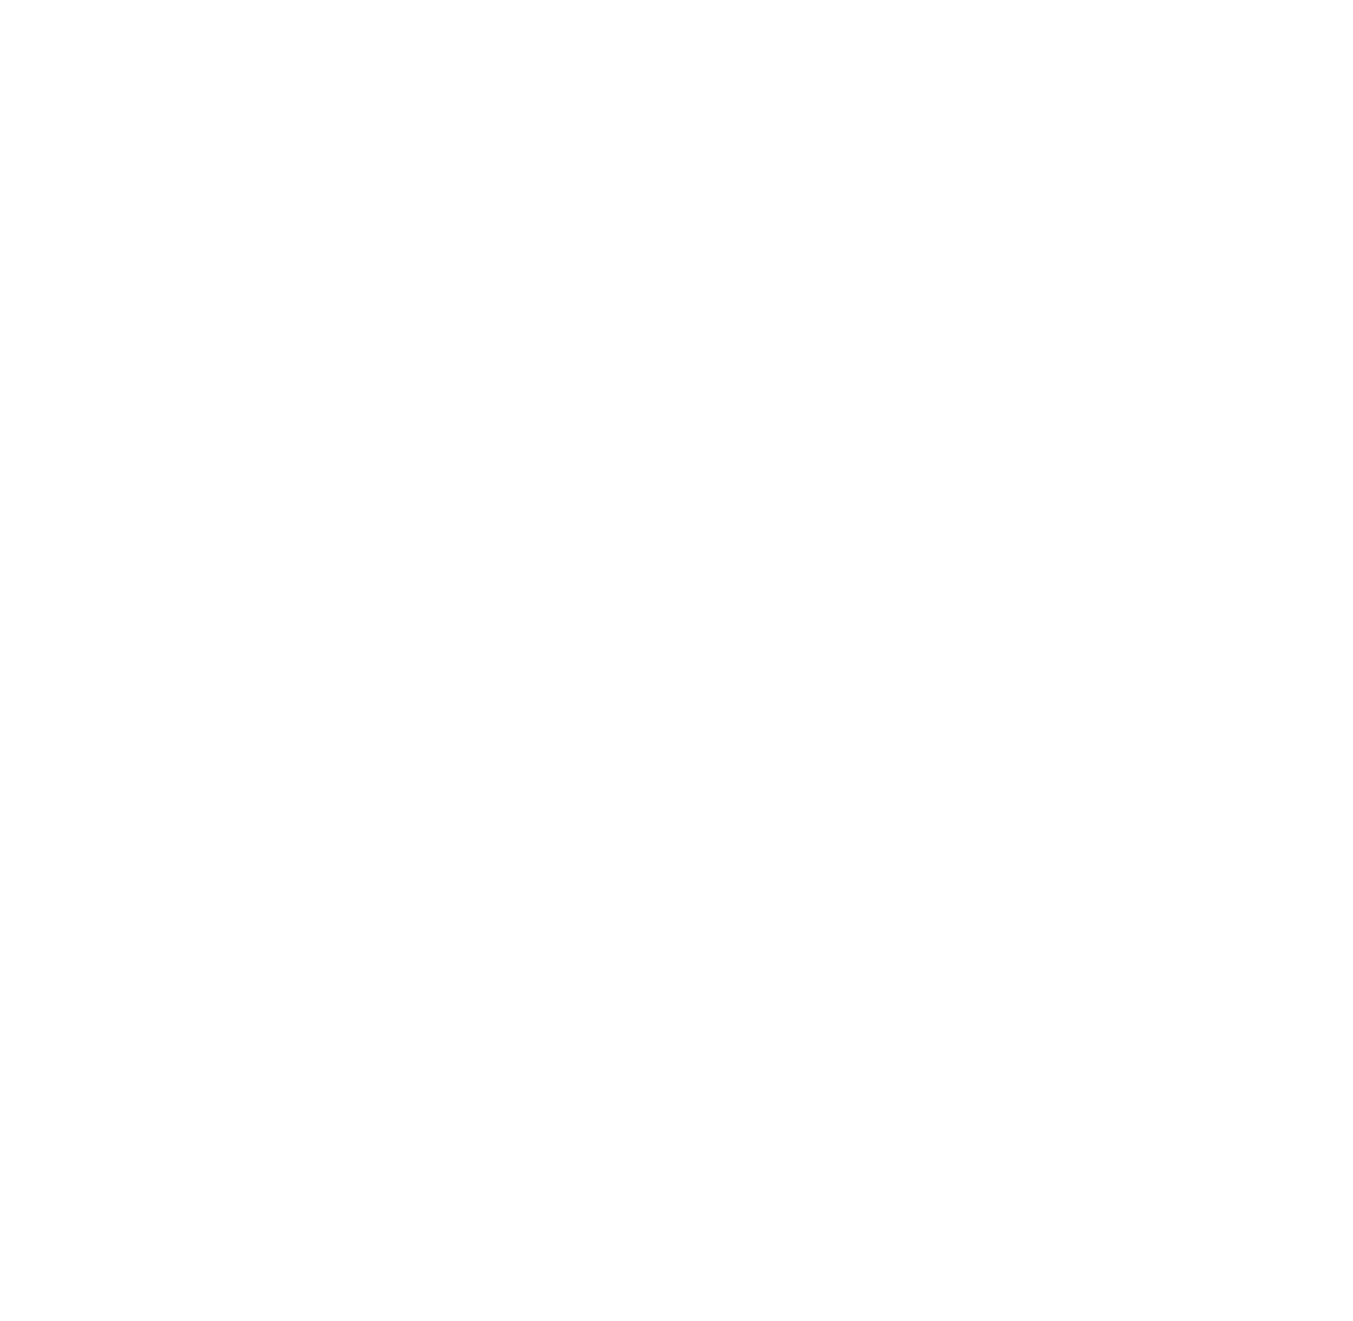 View, Inc. logo for dark backgrounds (transparent PNG)